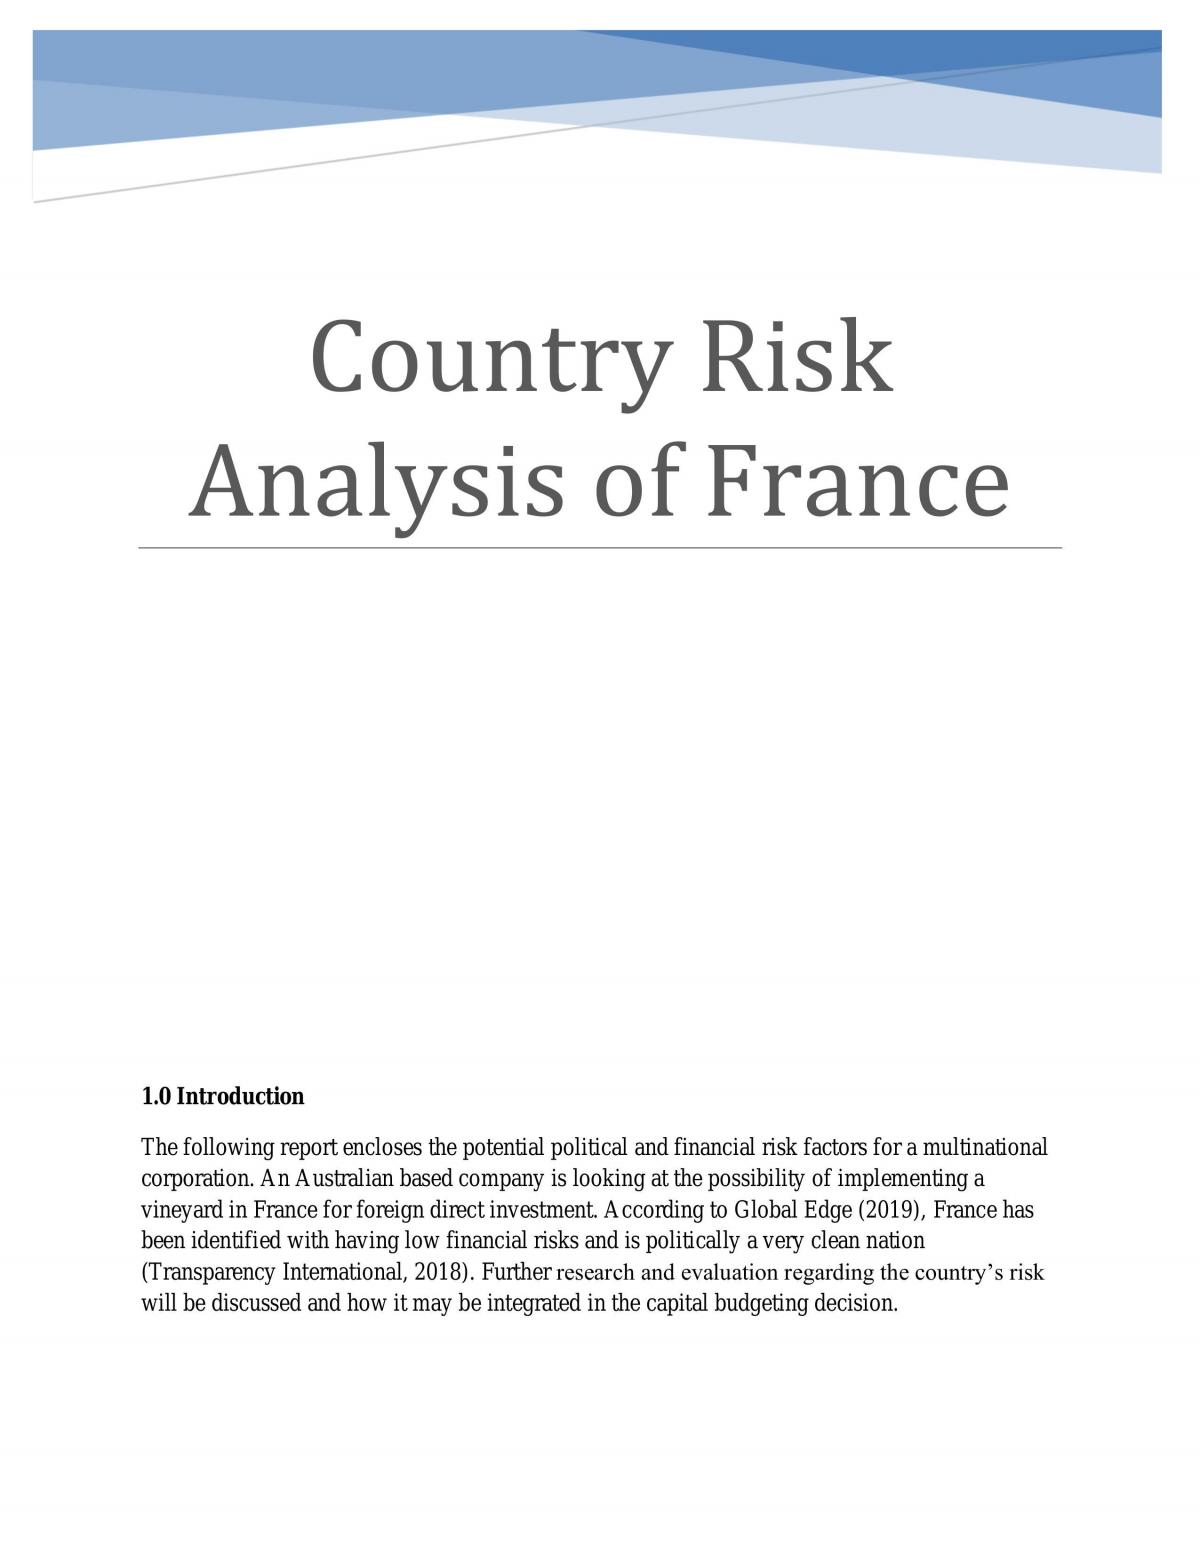 EFB240 Country Risk Analysis - Page 1